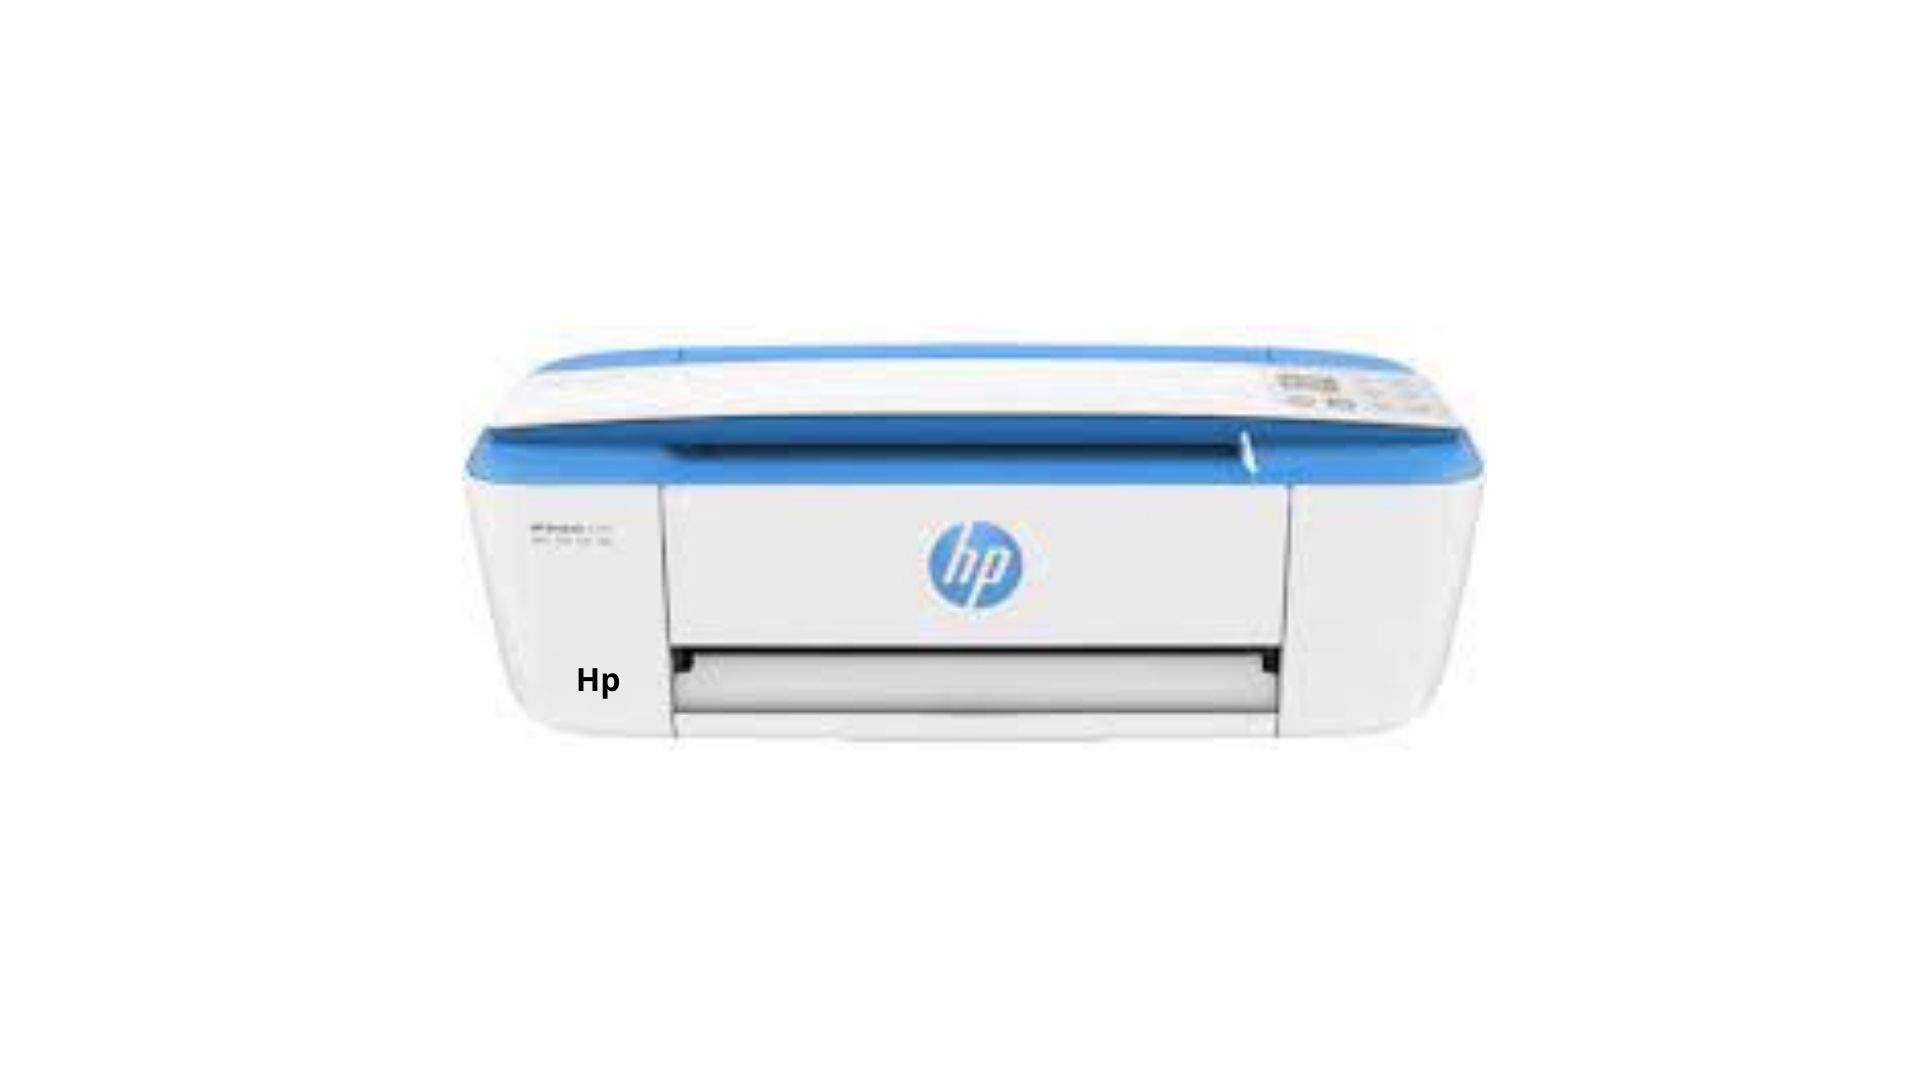 Hp printer issues